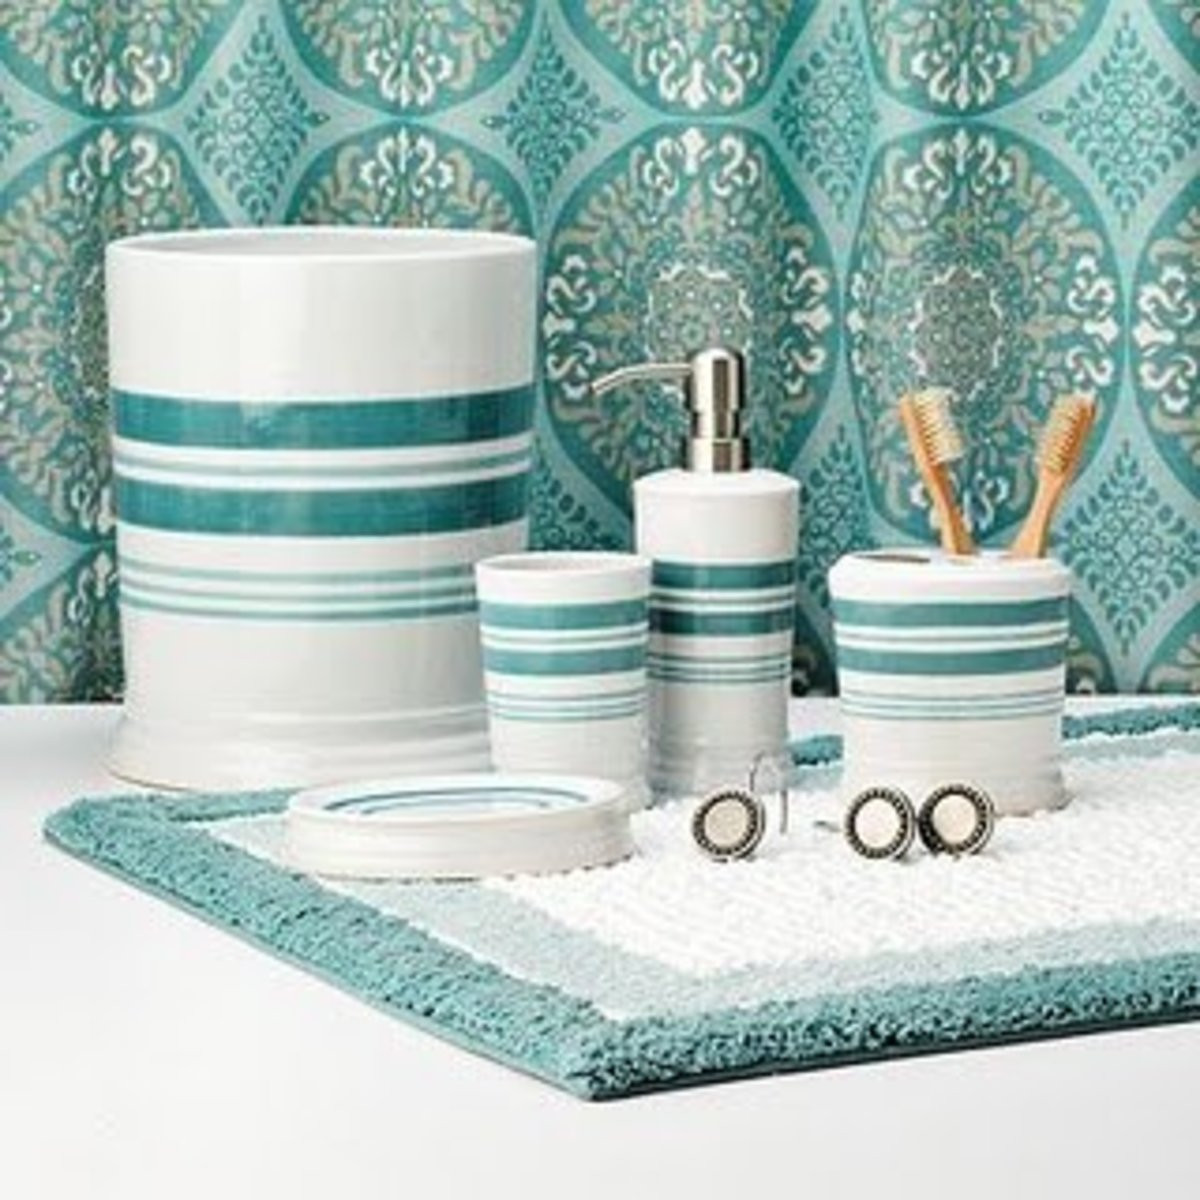 Turquoise Bathroom Decor
 Aqua Teal and Turquoise Home Remodeling Ideas